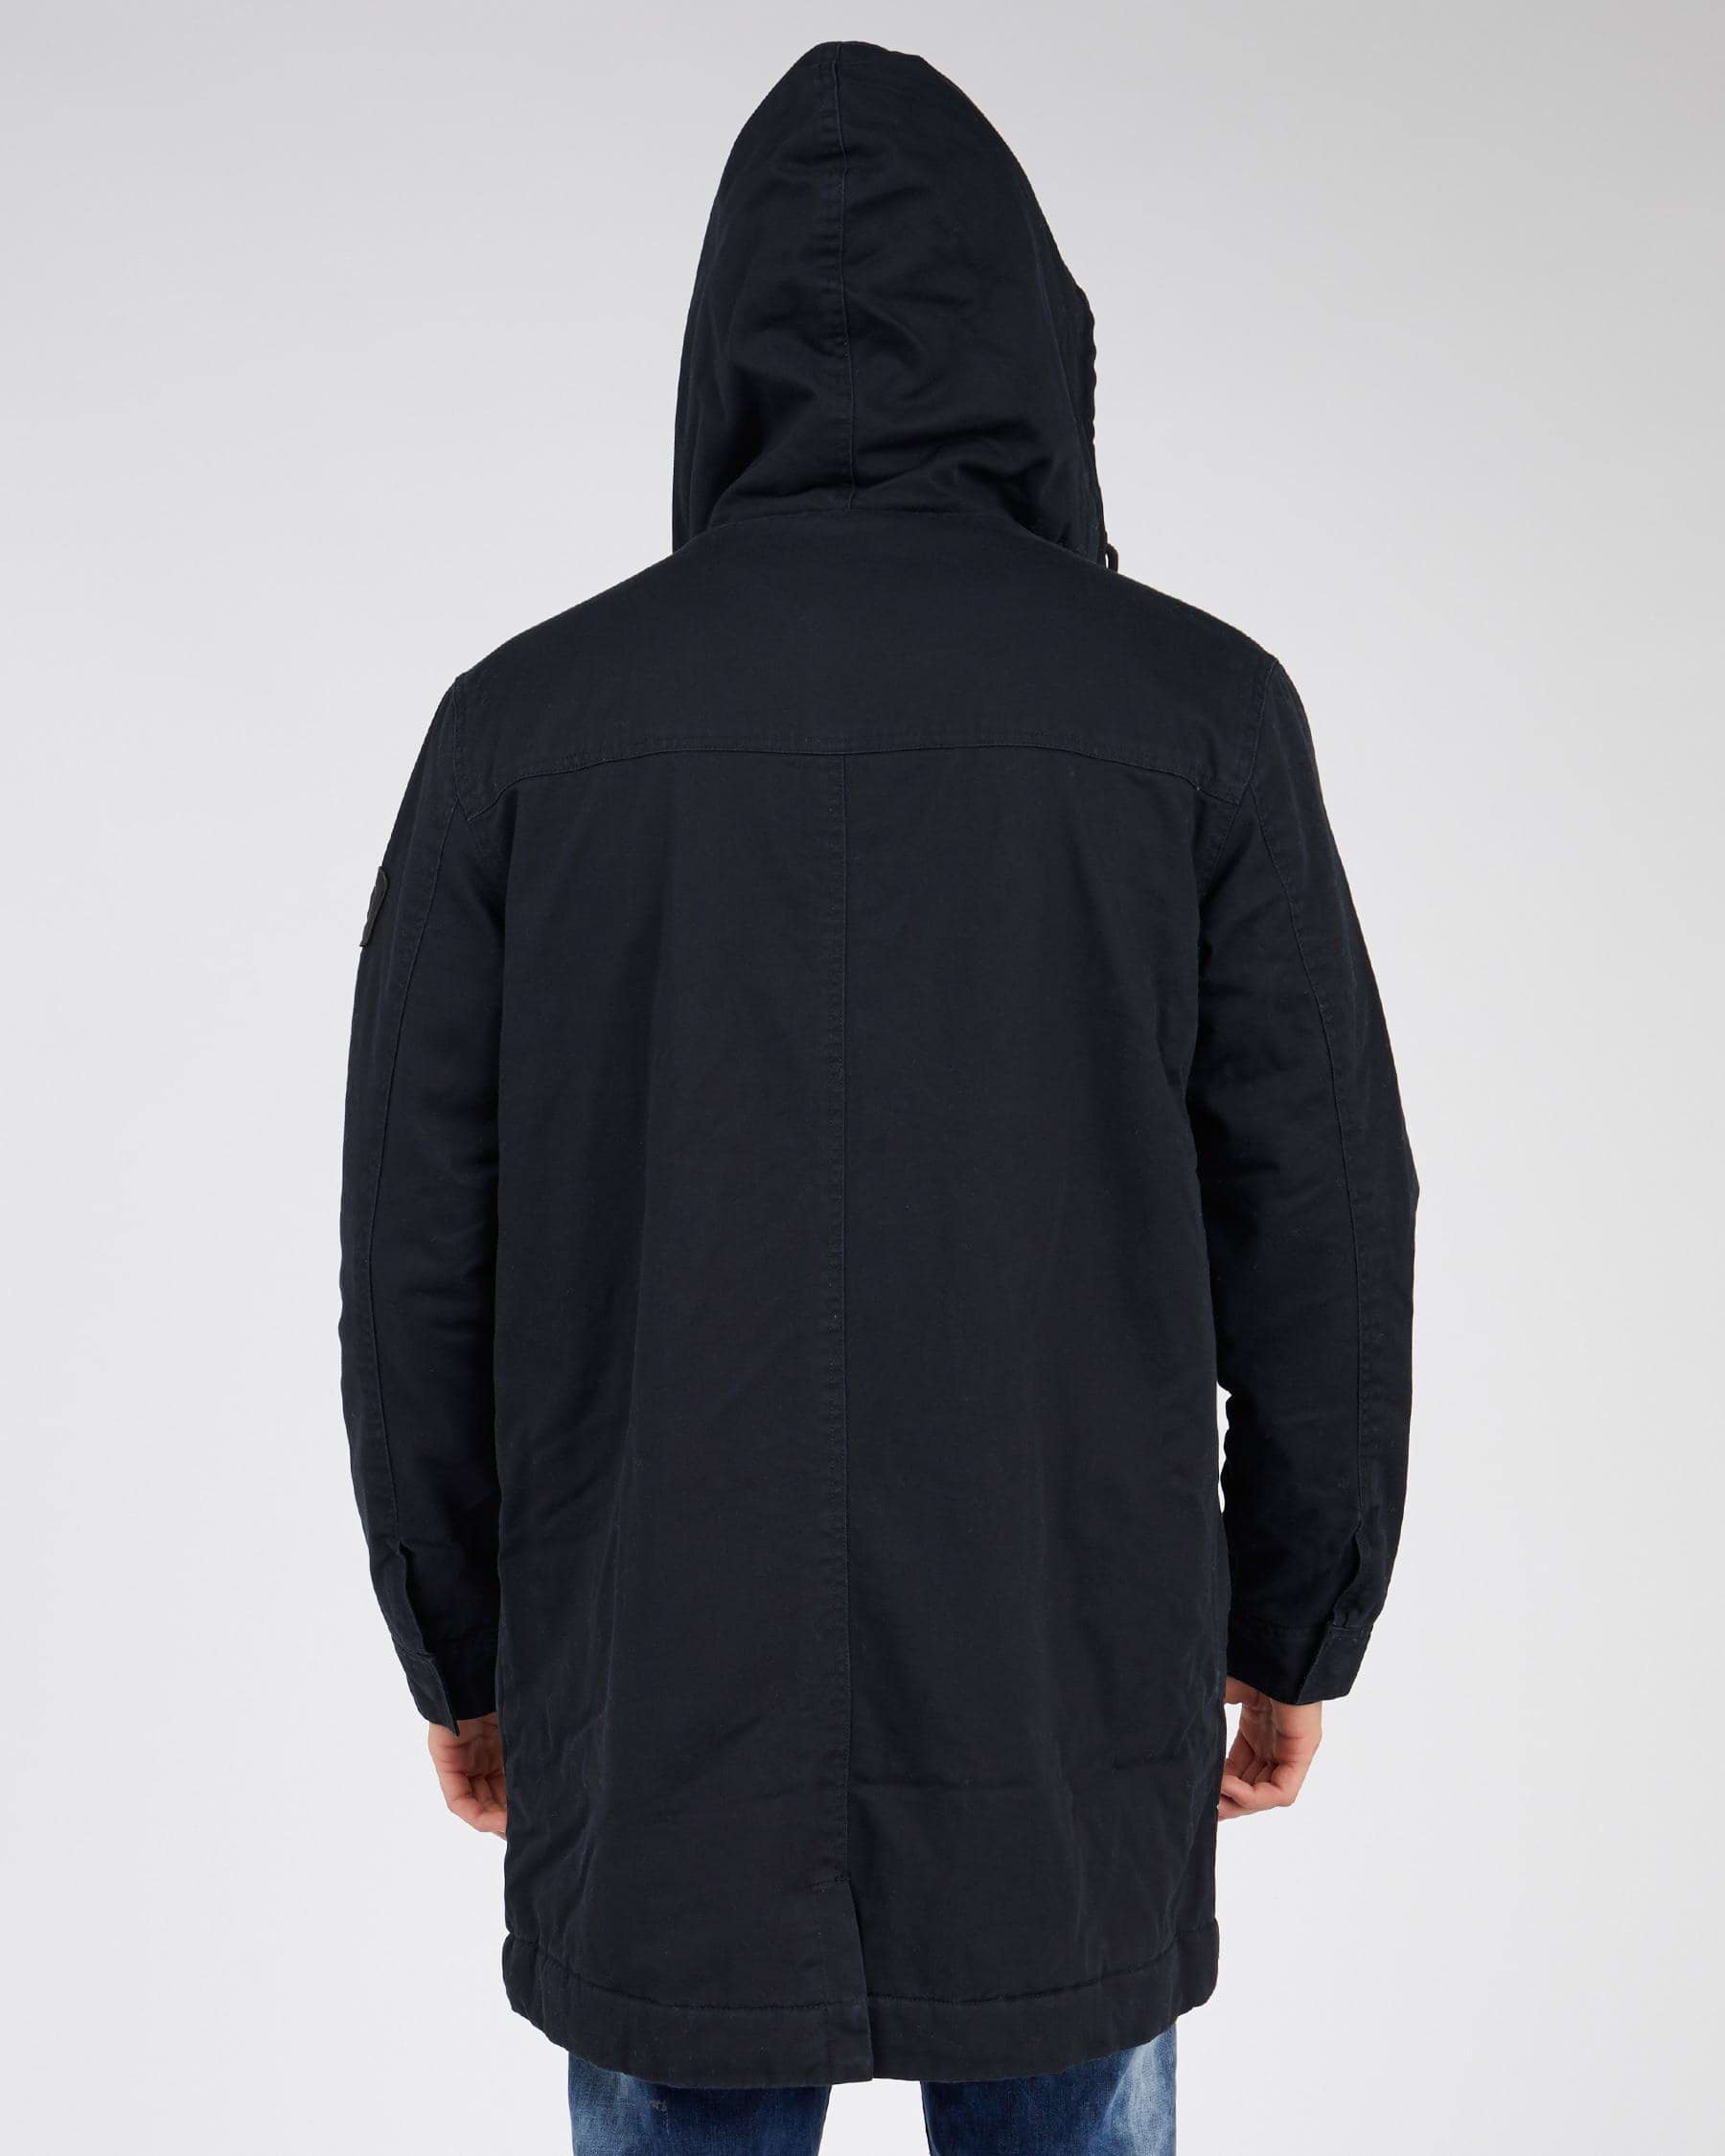 Quiksilver Magesty Crush Jacket In Black - Fast Shipping & Easy Returns ...